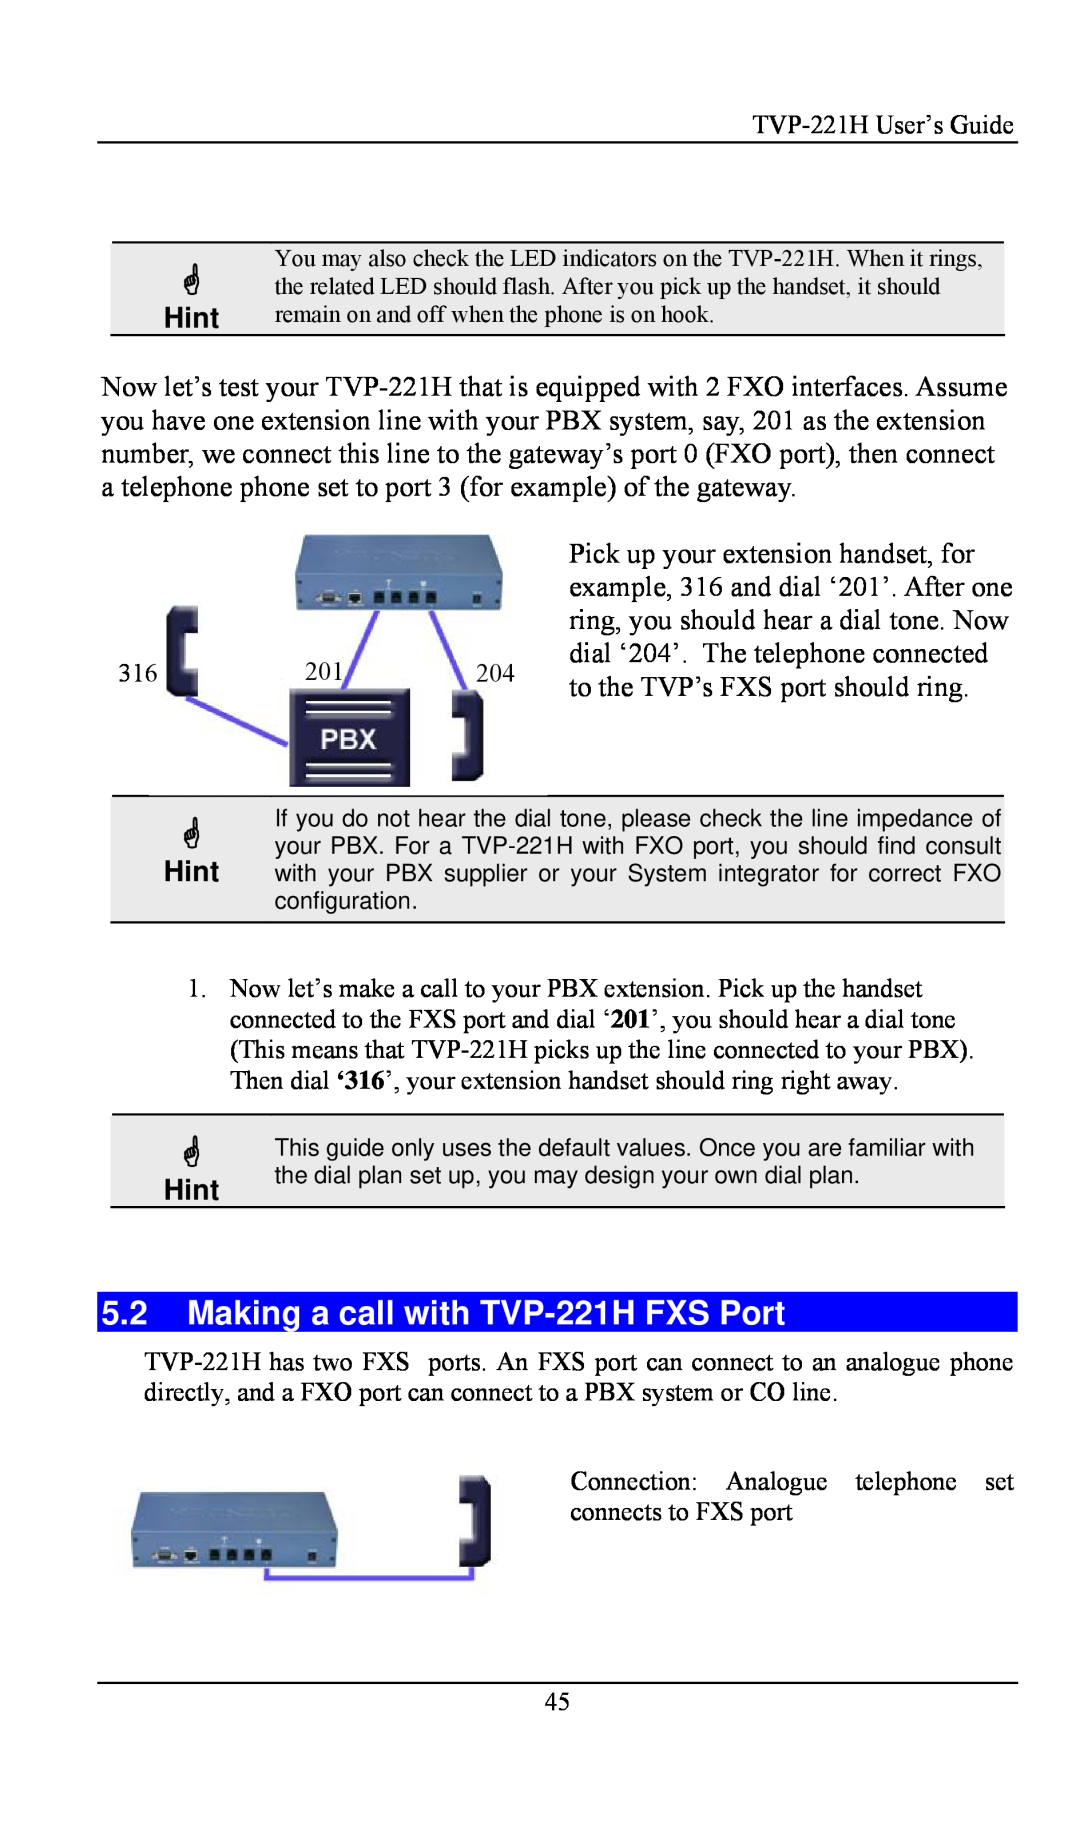 TRENDnet VoIP Gateway, TVP- 221H manual Making a call with TVP-221H FXS Port, Hint 